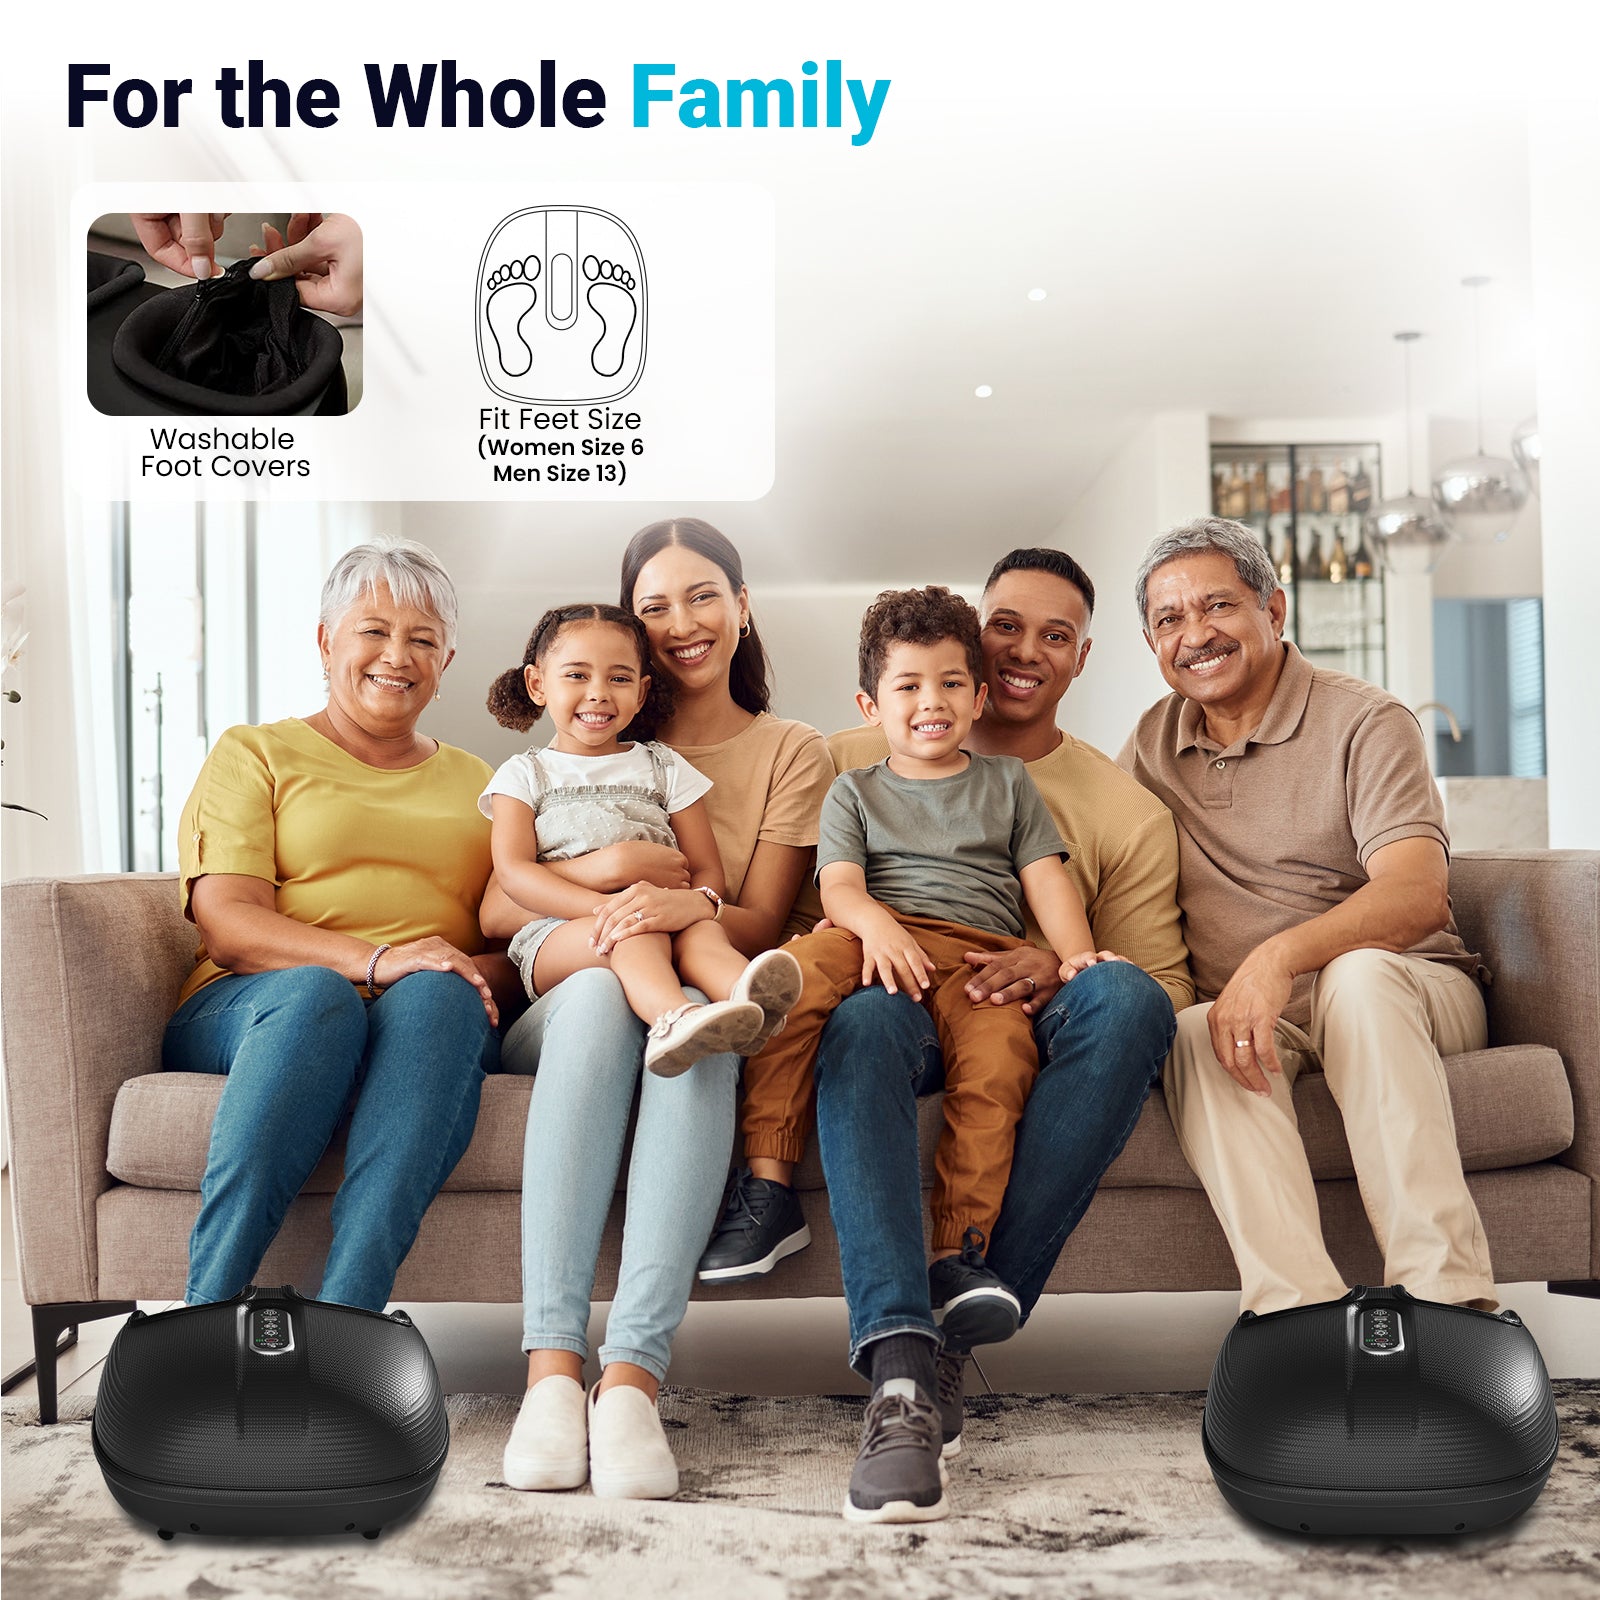 CuPiLo Foot Massager with Heat, Shiatsu Deep Knead Feet Massager with Remote Control - CPL-5522RC